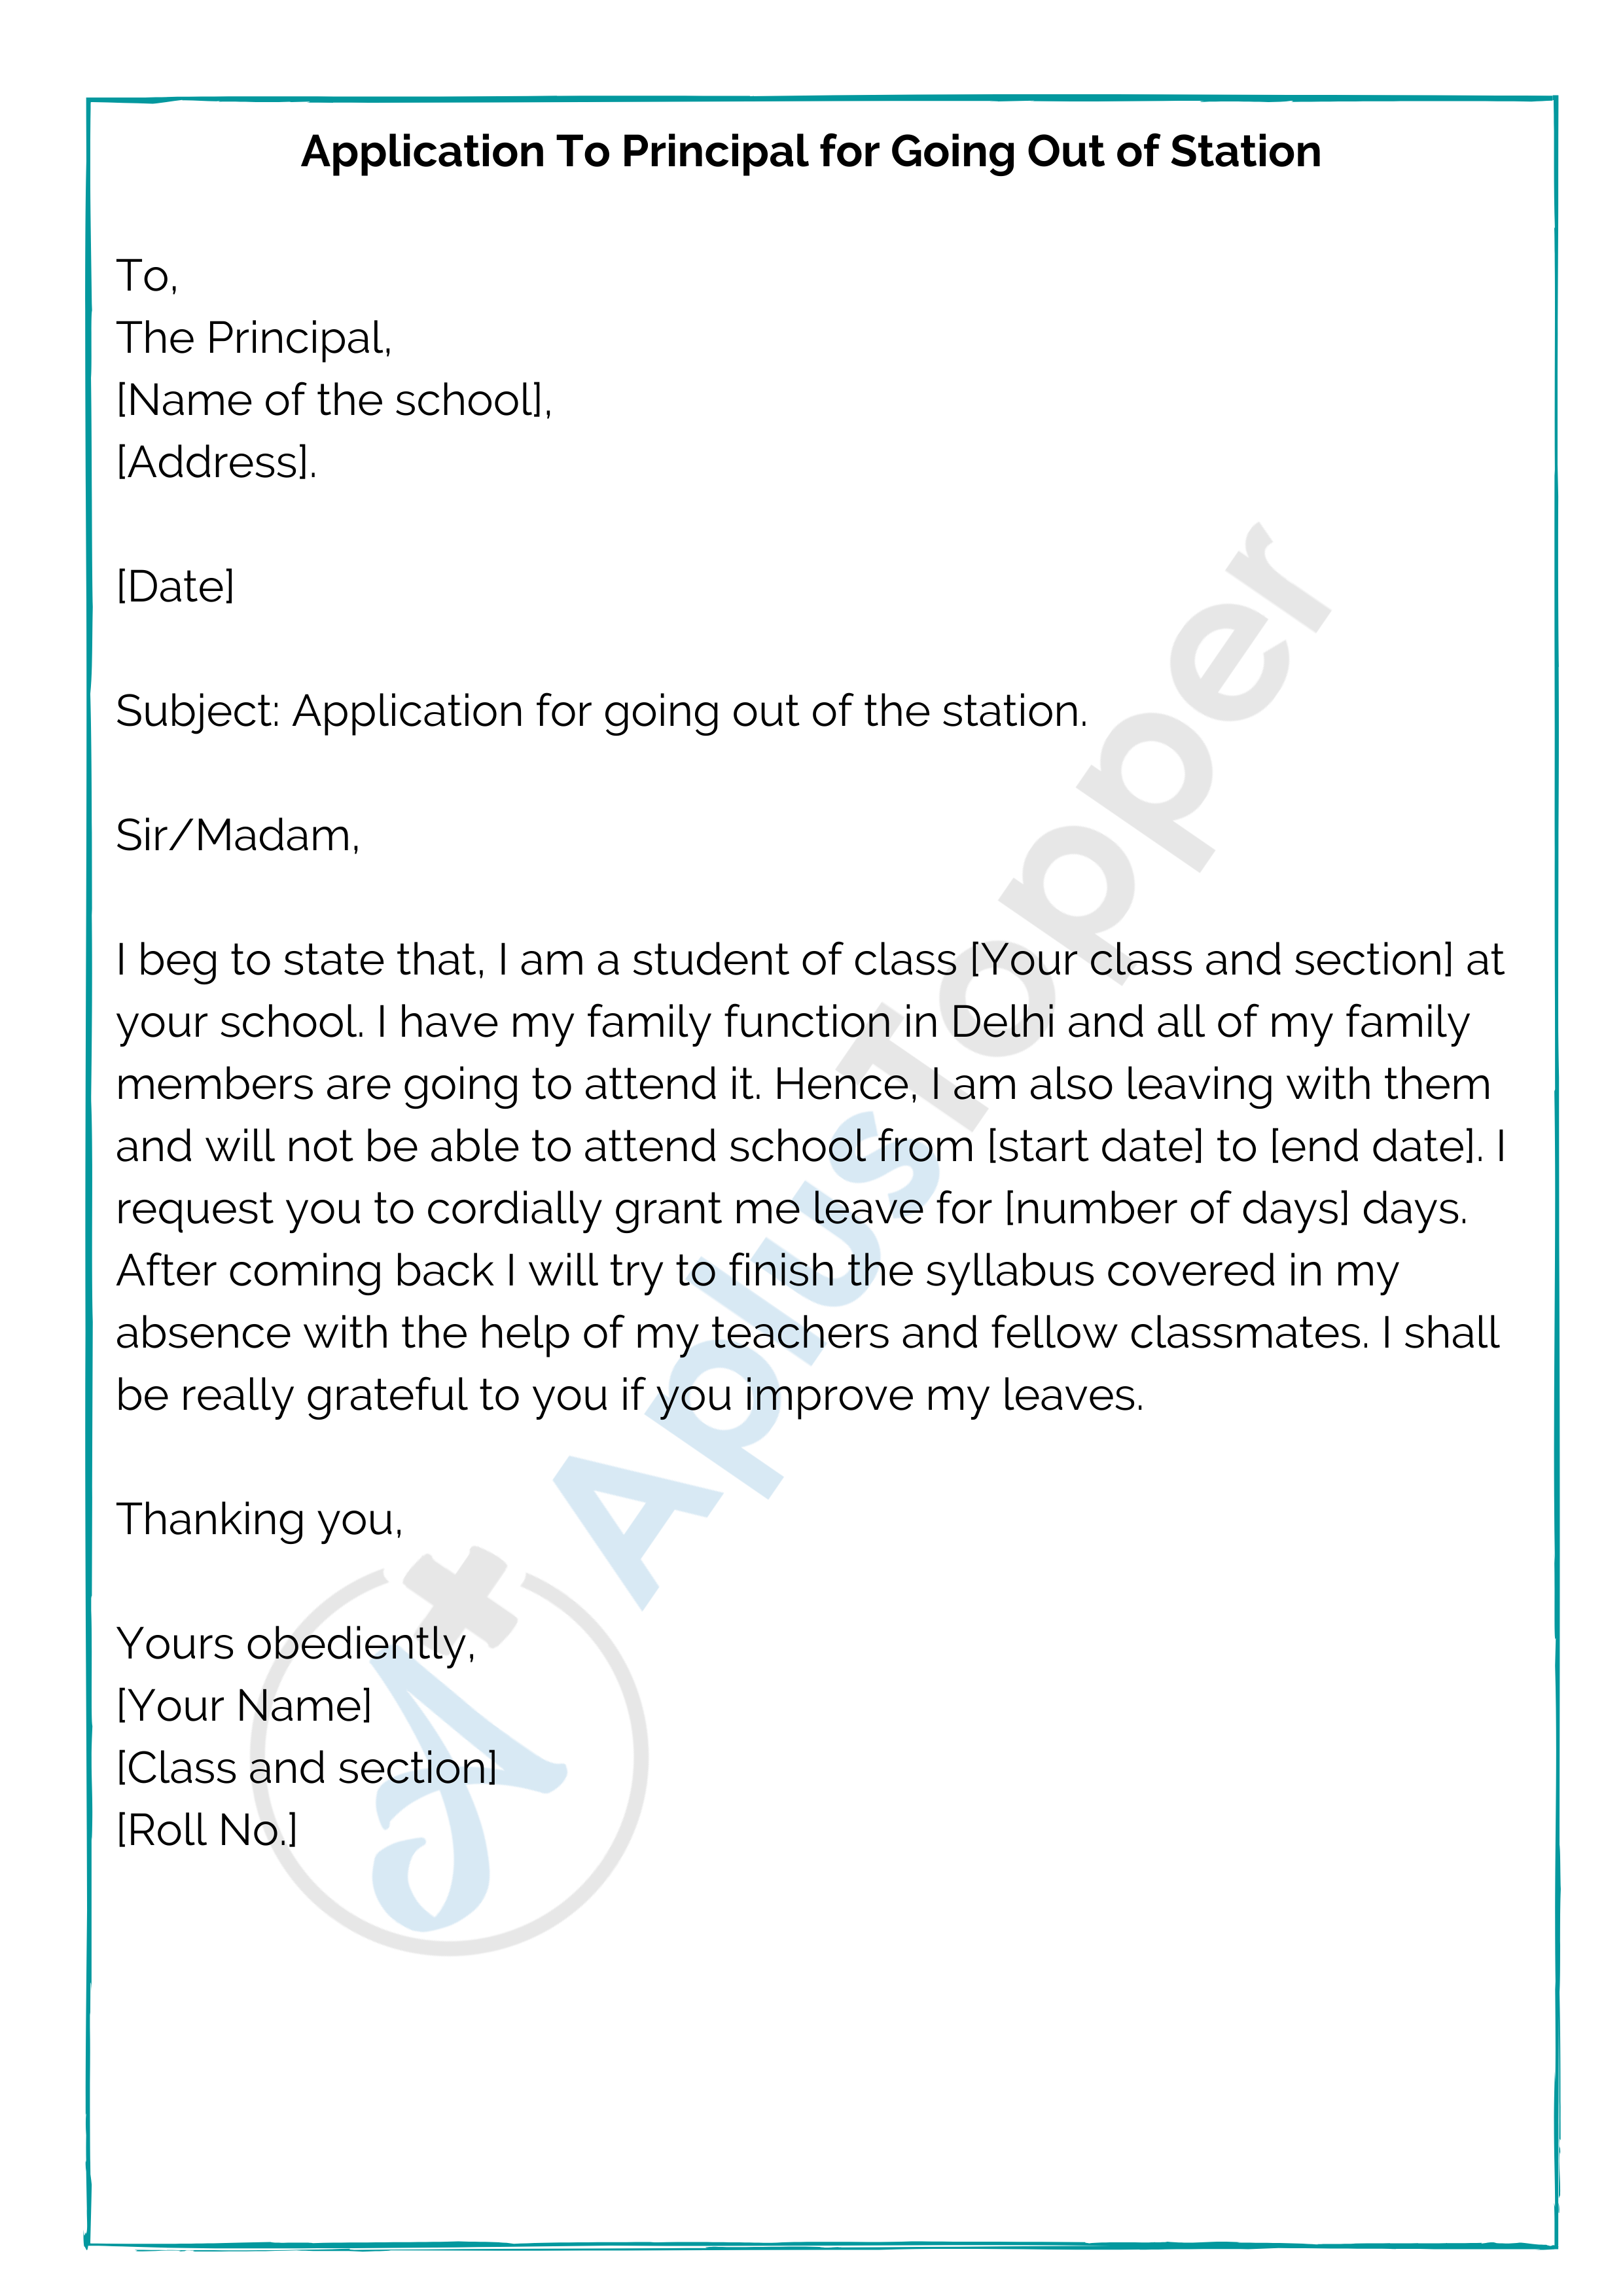 how to write an application letter to the principal